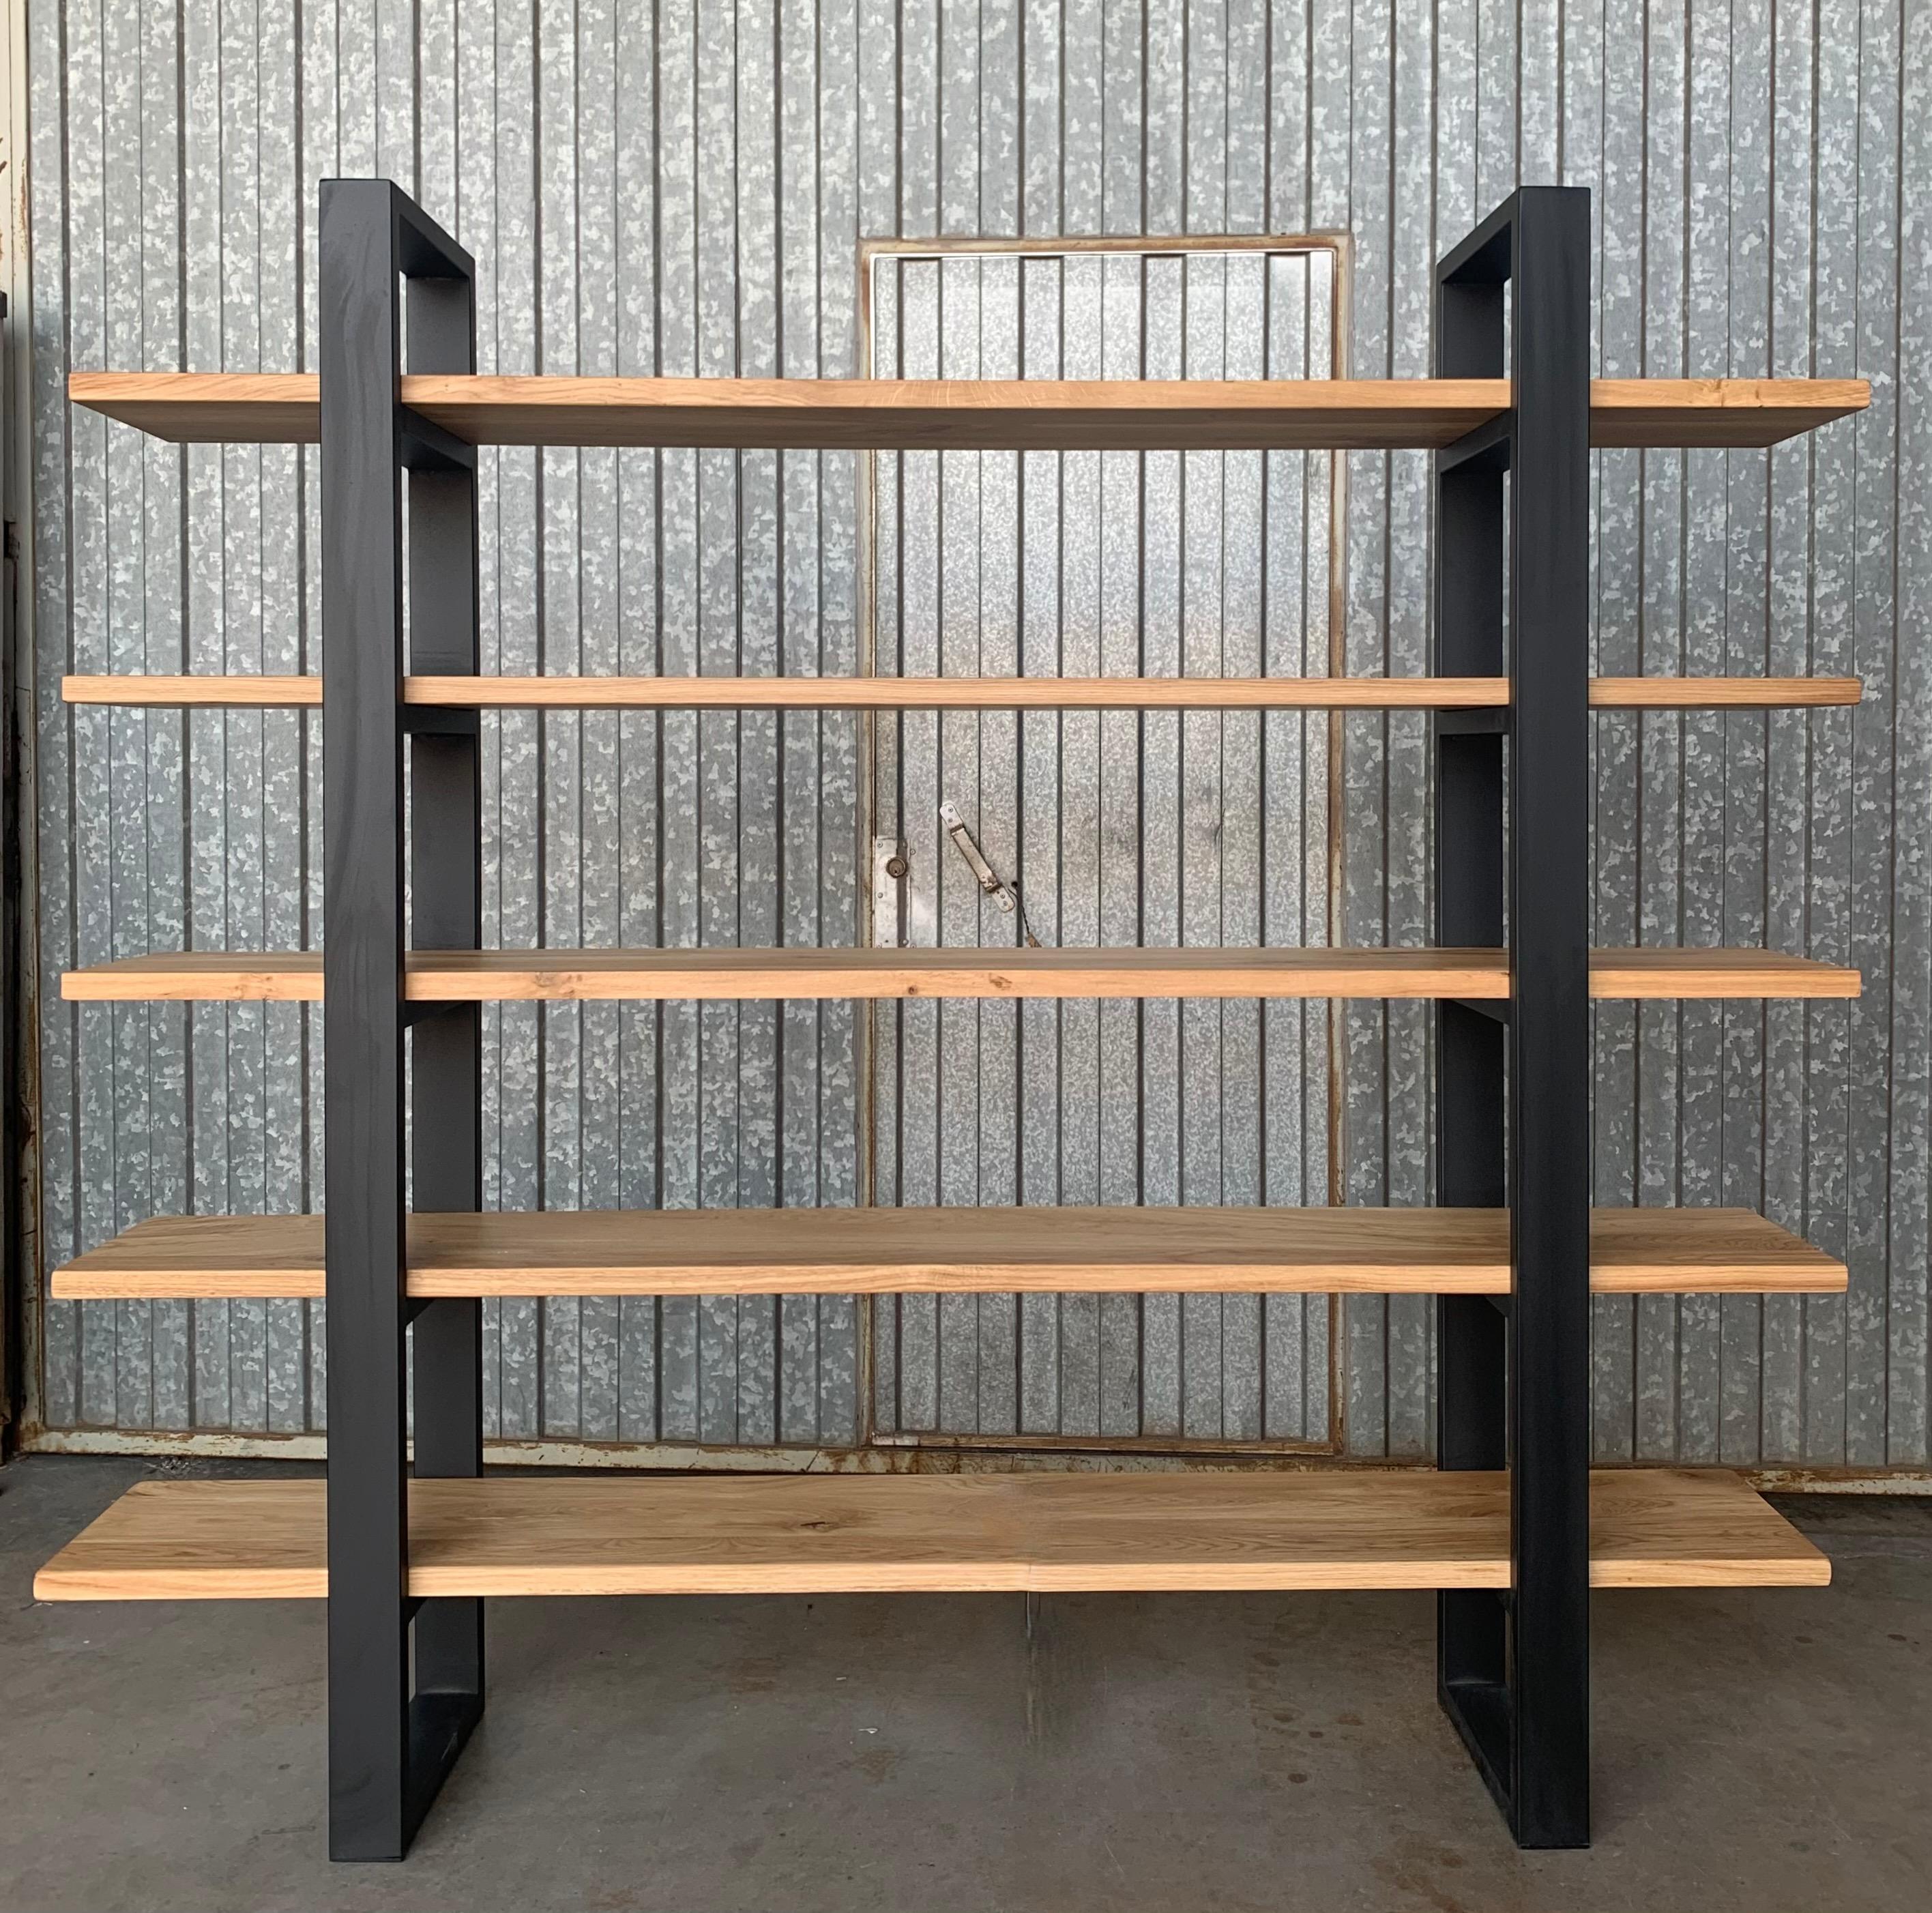 New custom etagere with three oak shelves and iron structure

You can choose th dimensions, the colors and the wood.